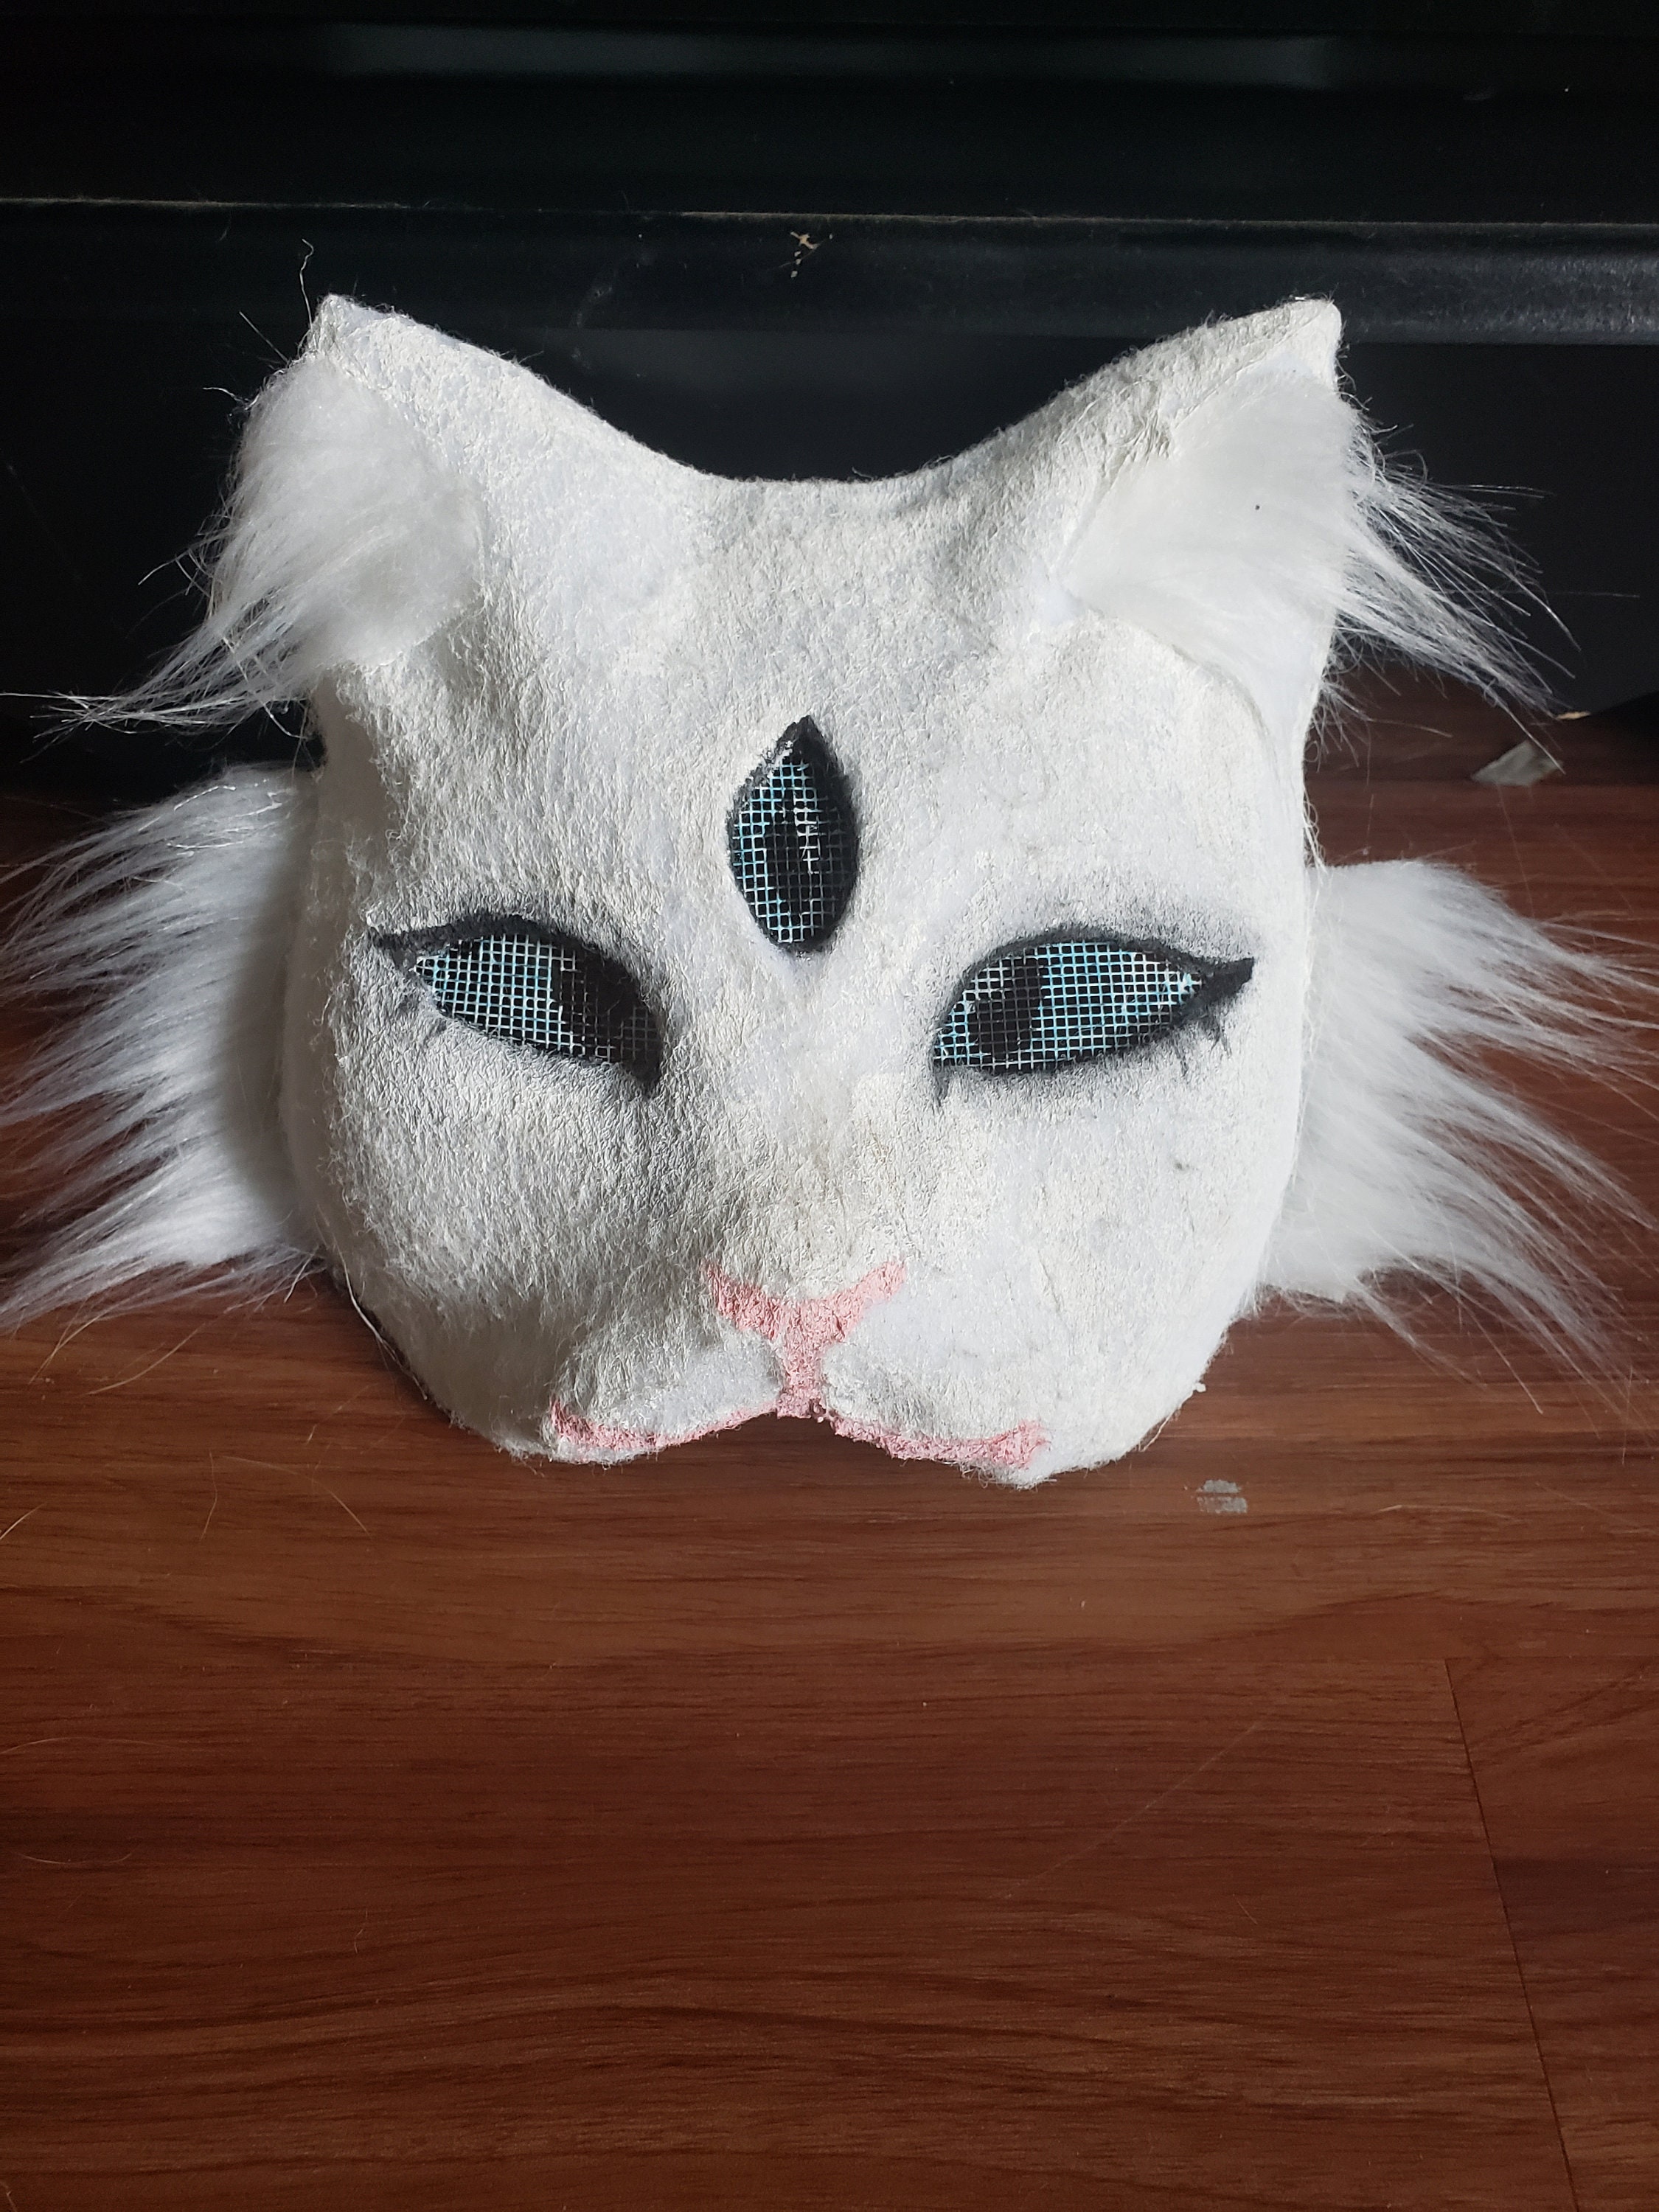 crying white cat Mask for Sale by CleverJane